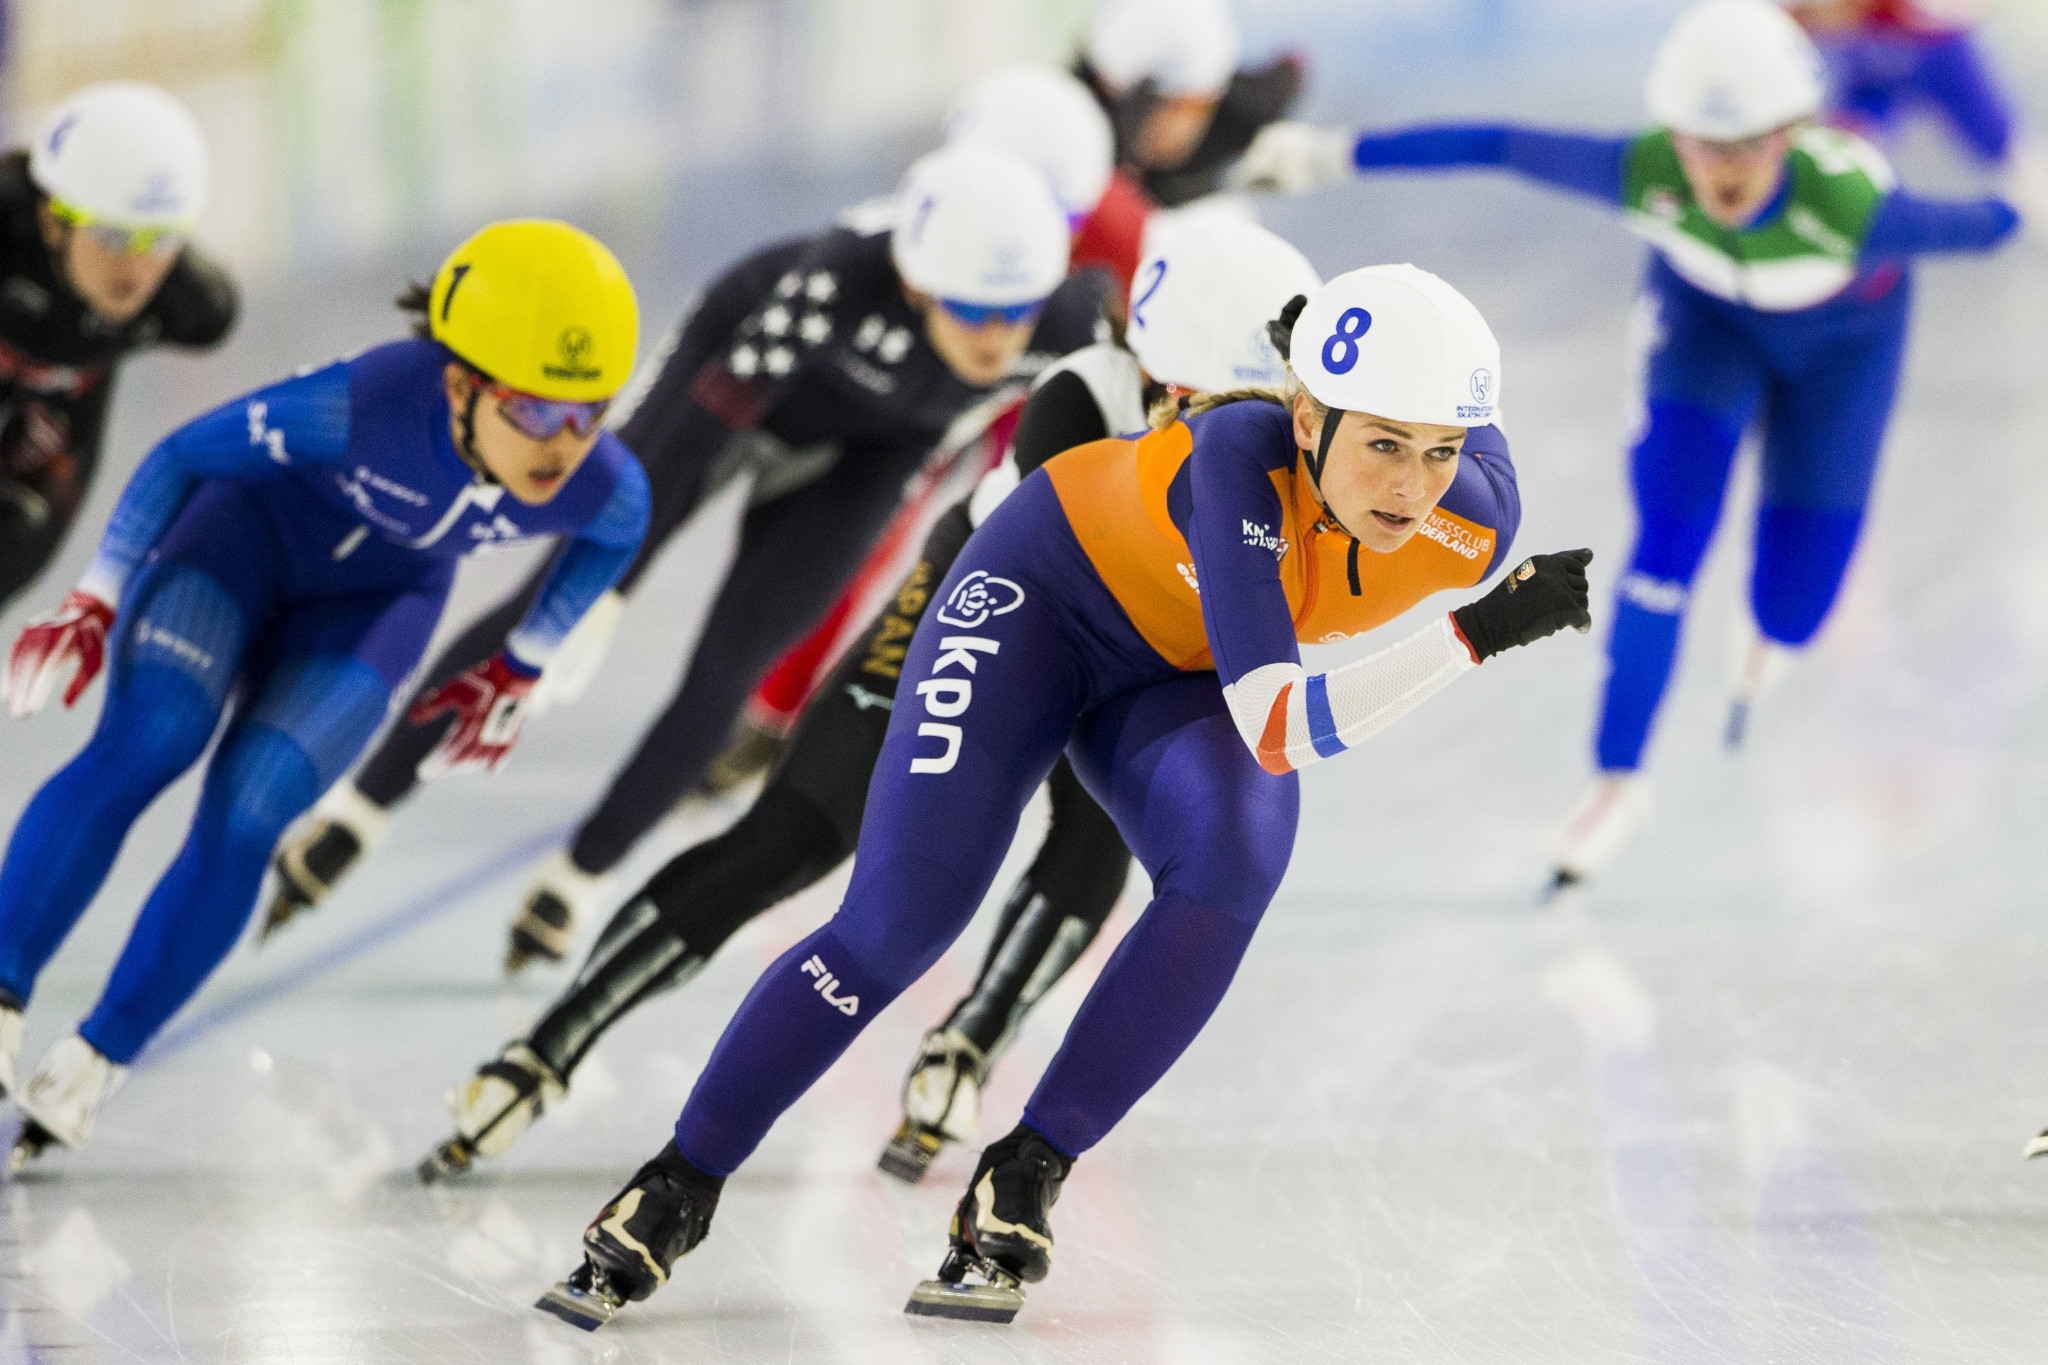 ISU seek new venue for World Speed Skating Championships after Beijing 2022 test events cancelled